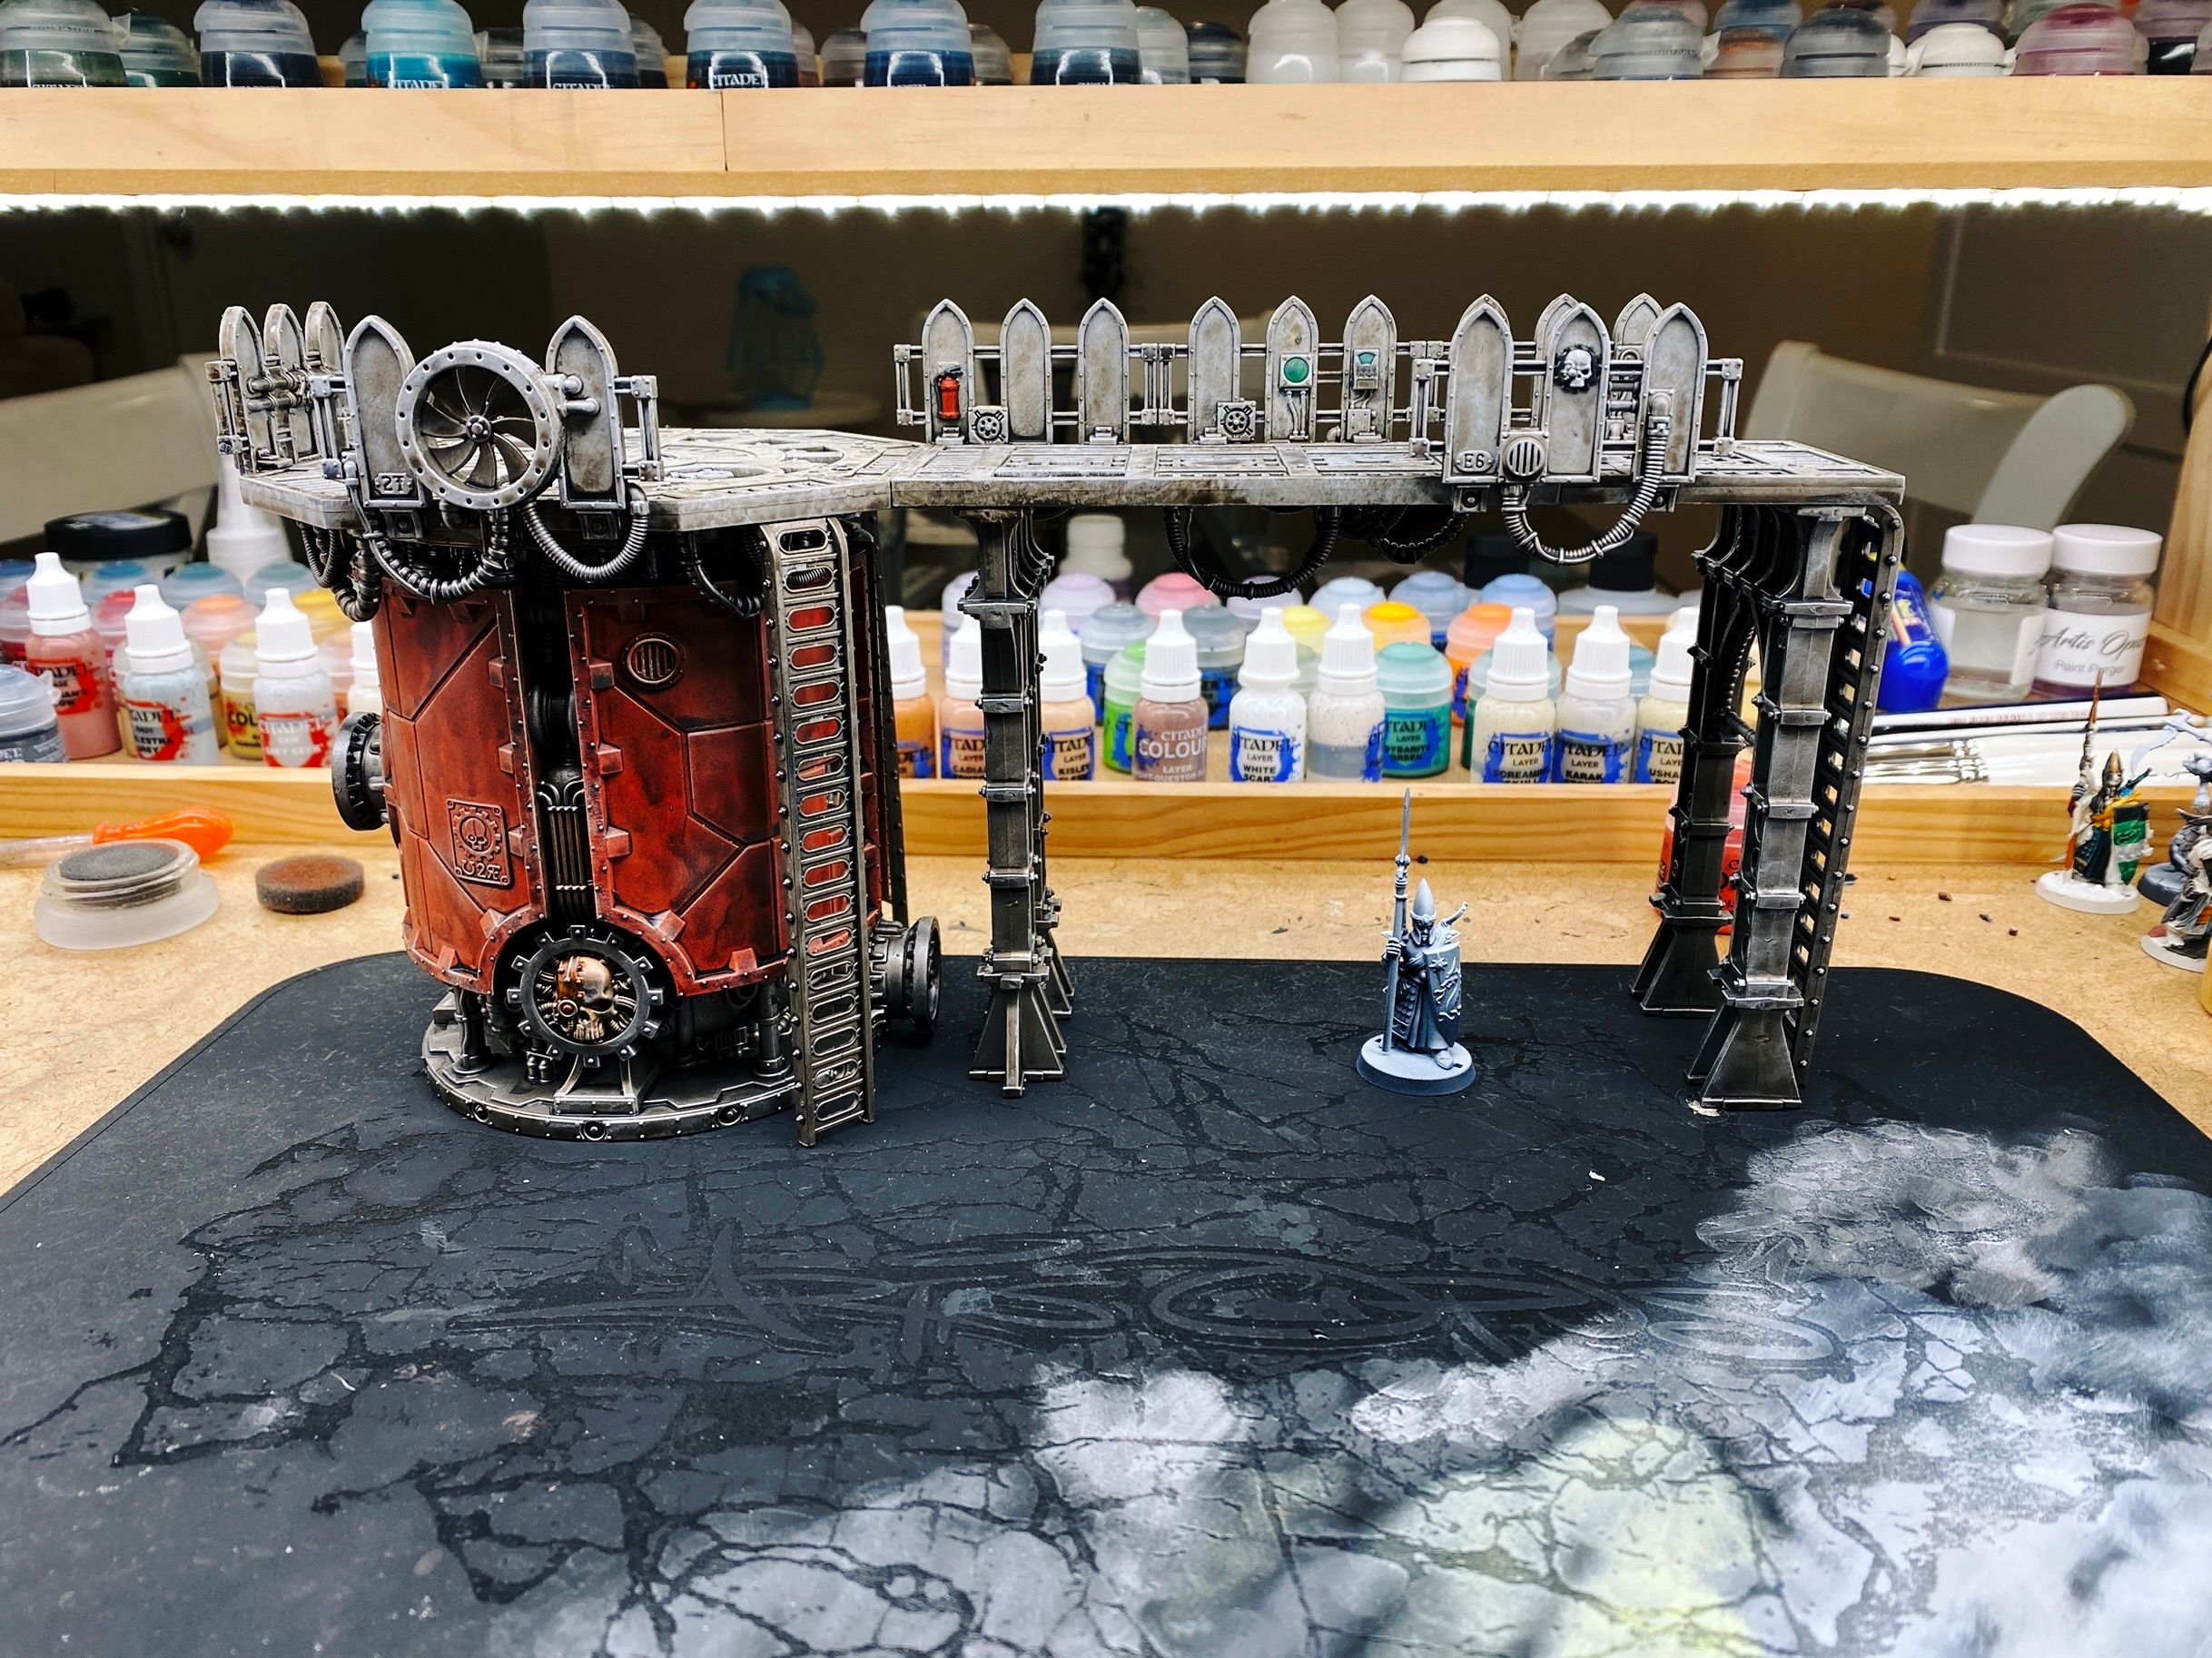 A photo of the "Ferratonic Incinerator" terrain from Warhammer 40,000. It's a massive rusty-looking cylindrical furnace with a platform on top and a gantry that extends across to the right. There's all sorts of pipes and wires and controls all over the whole thing and it's borderline steampunk but also very industrial.